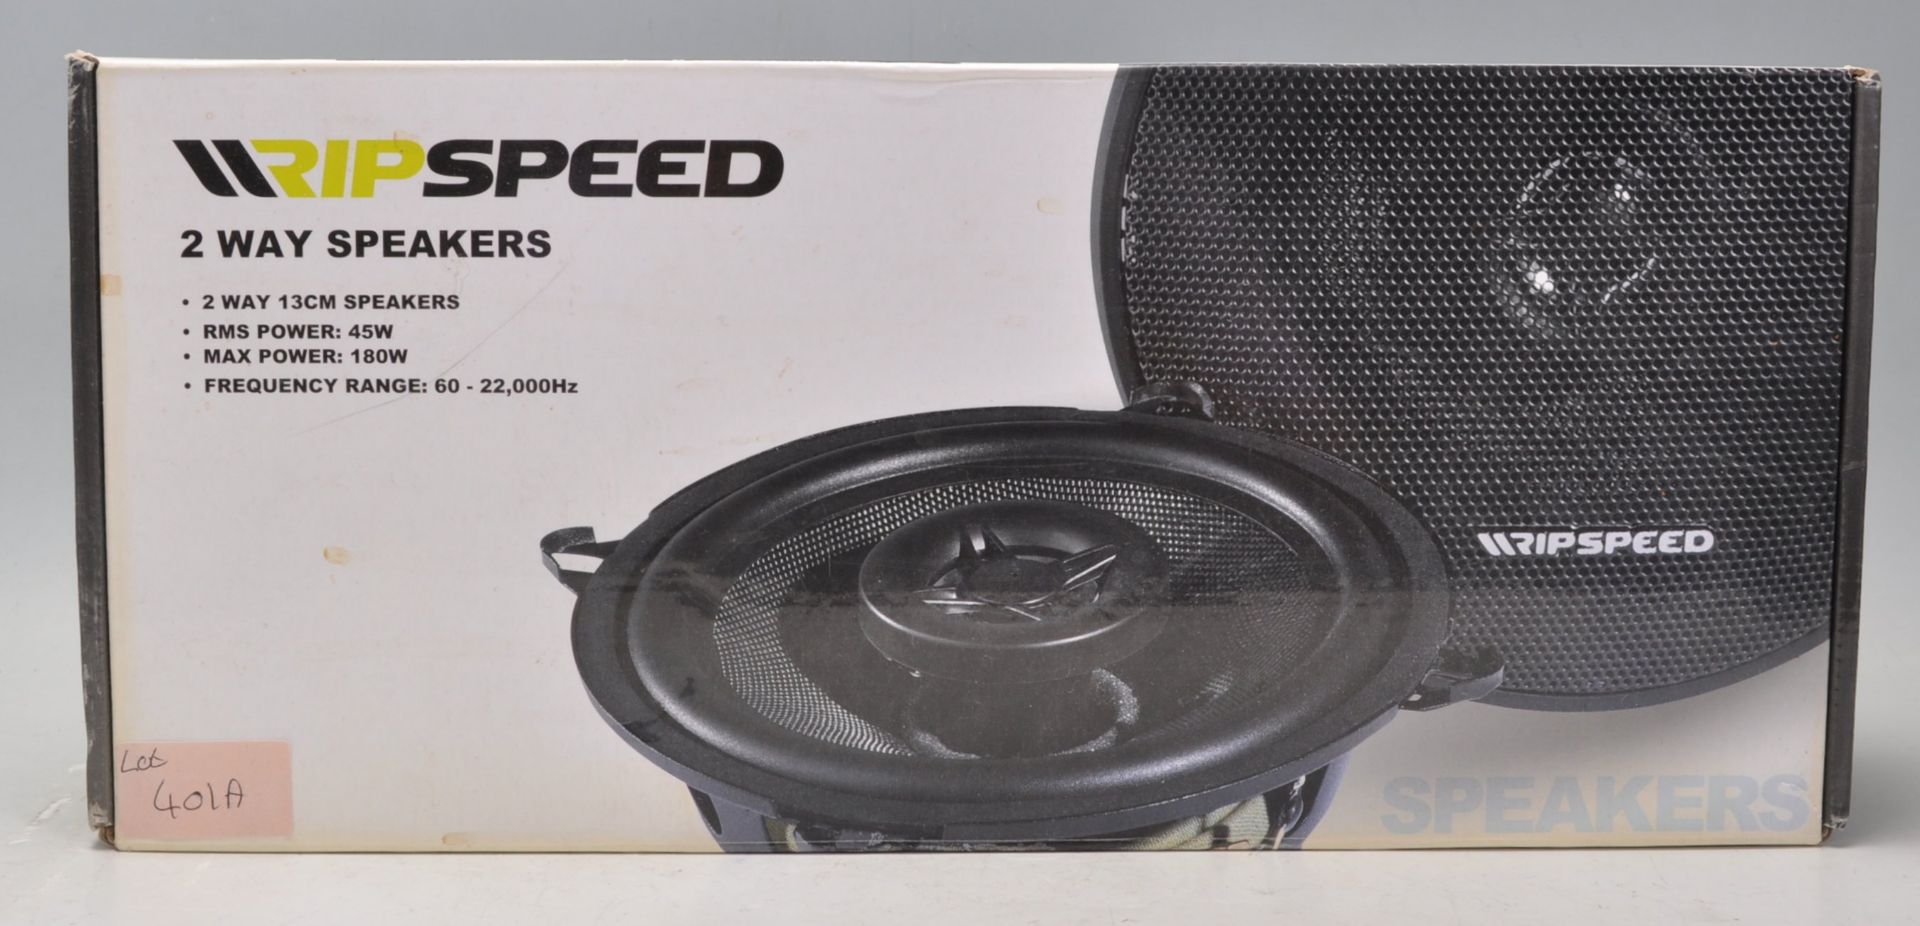 A pair of brand new Ripspeed 2 Way Speakers.